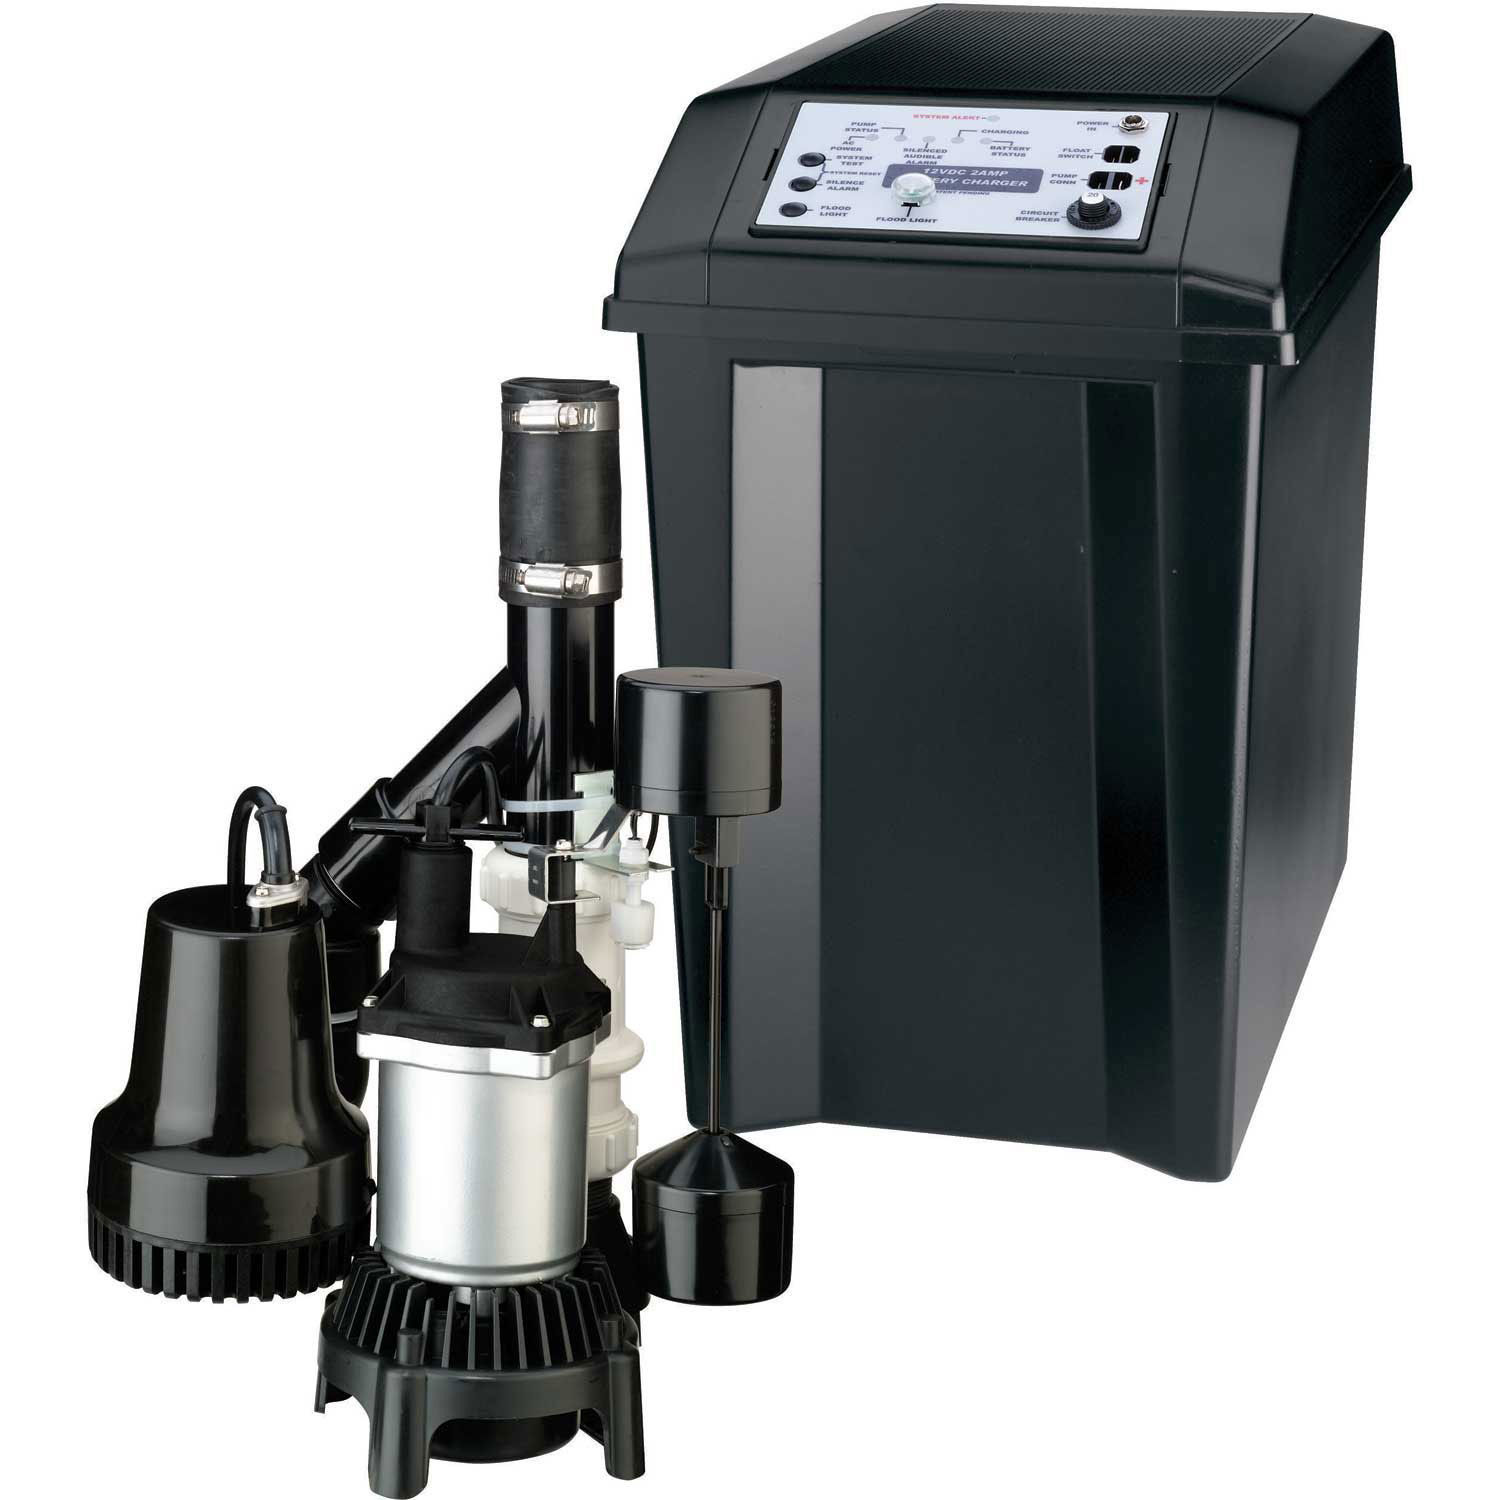 battery backup for sump pump systems